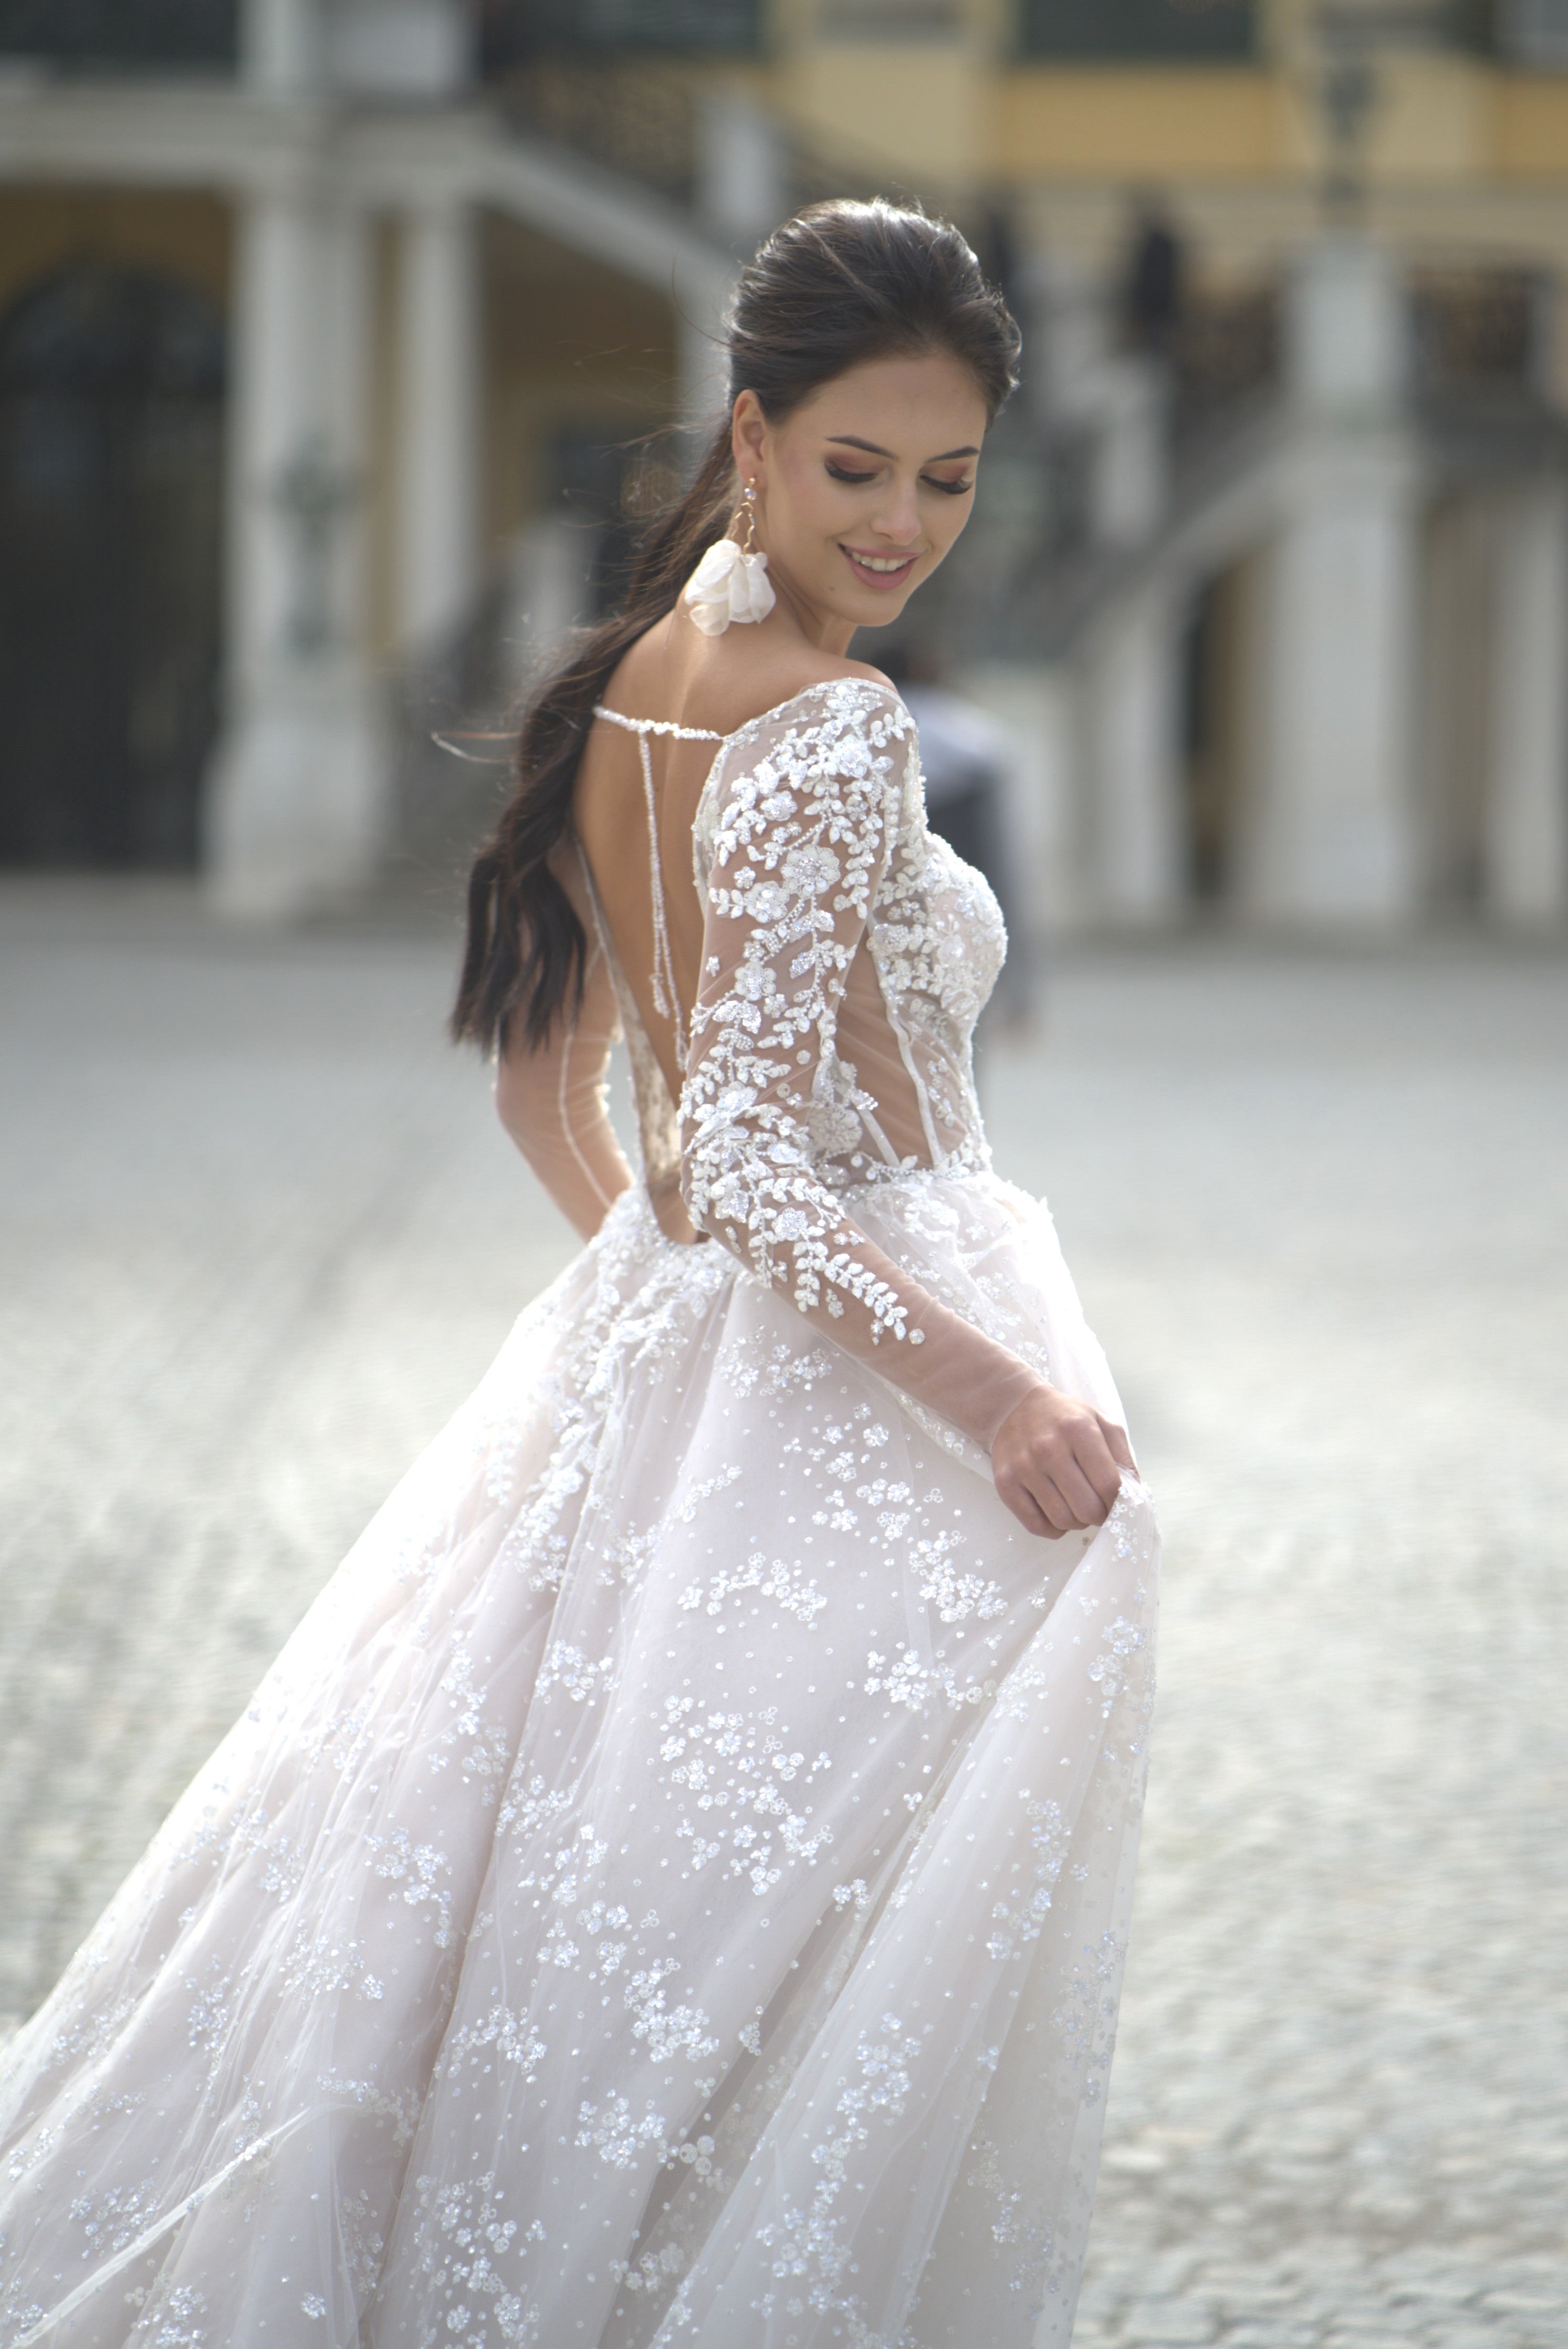 custom wedding dress floral lace wedding dress with long sleeves and open back 